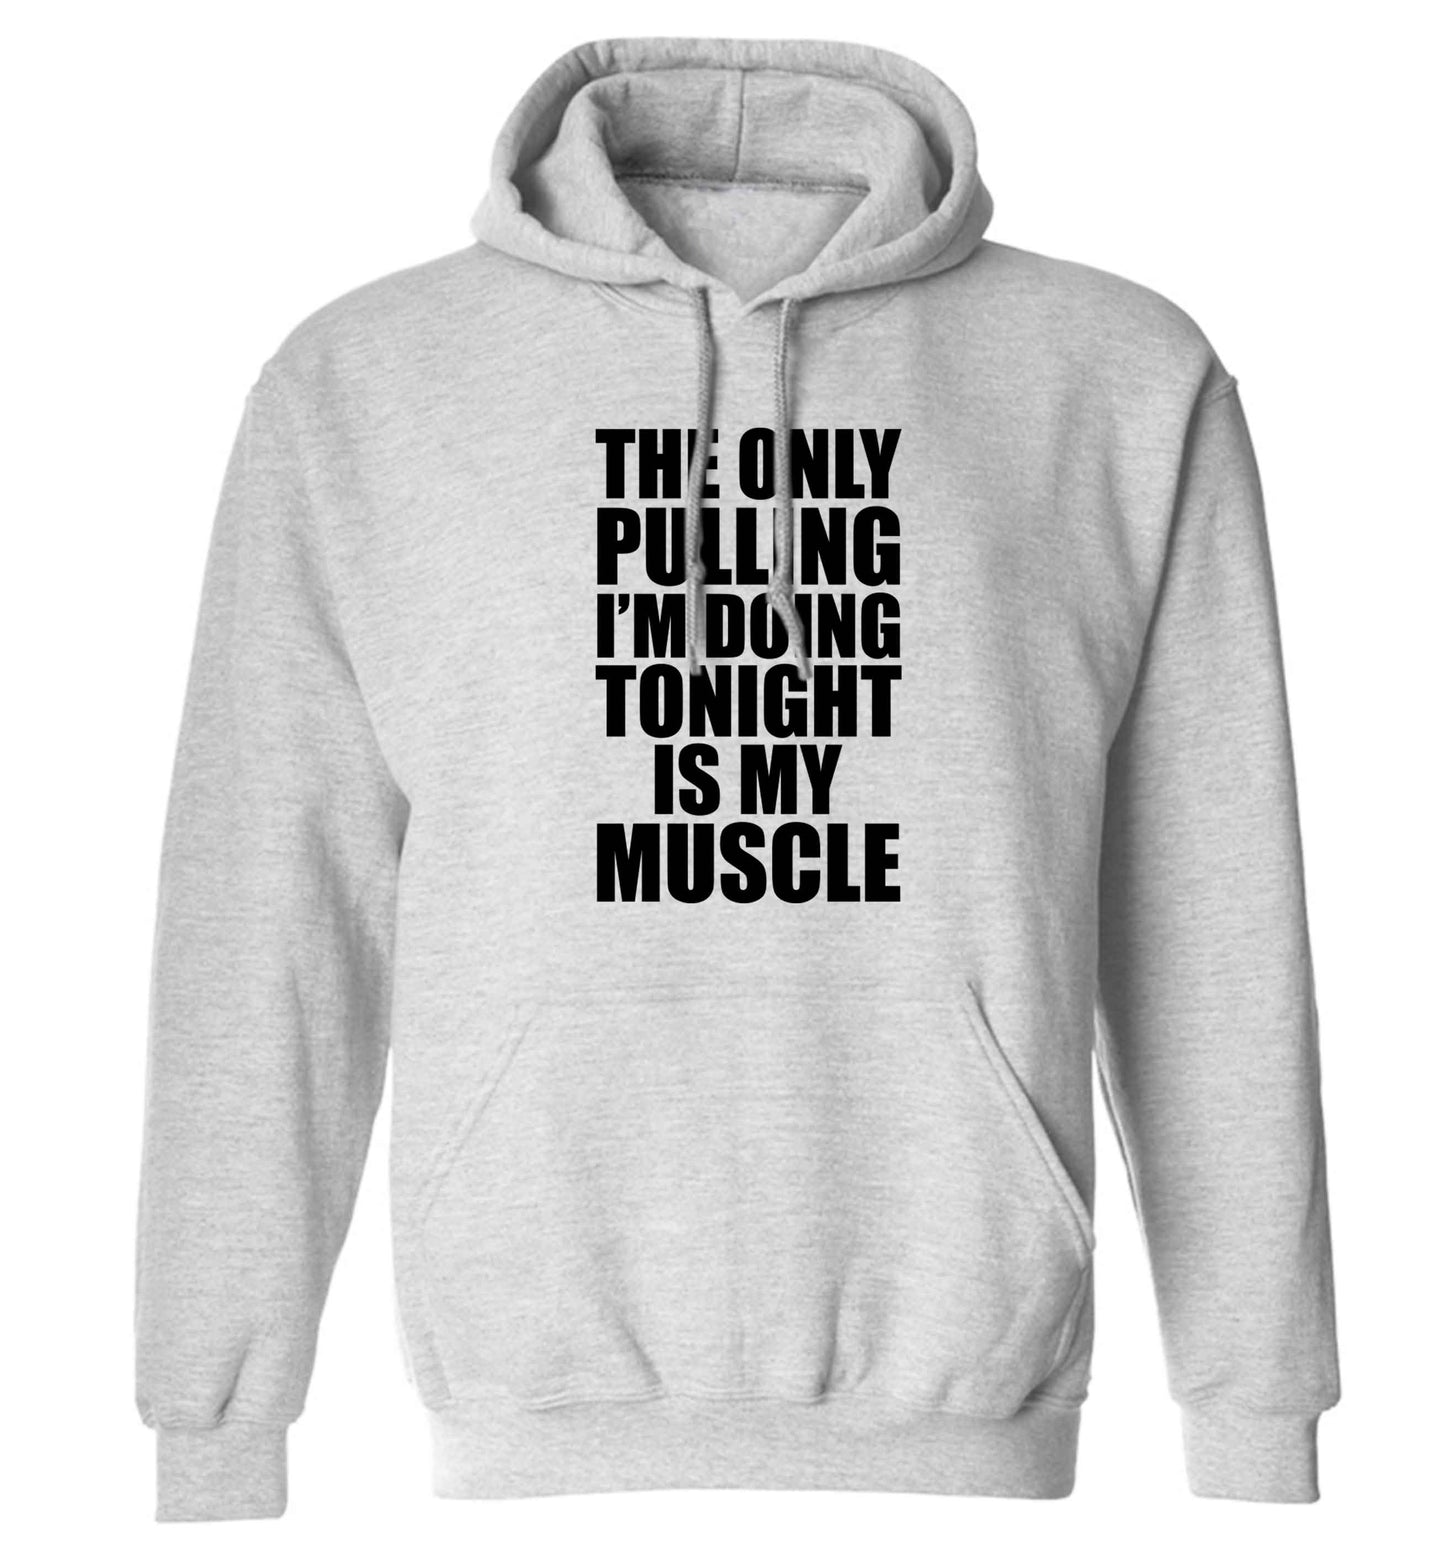 The only pulling I'm doing tonight is my muscle adults unisex grey hoodie 2XL